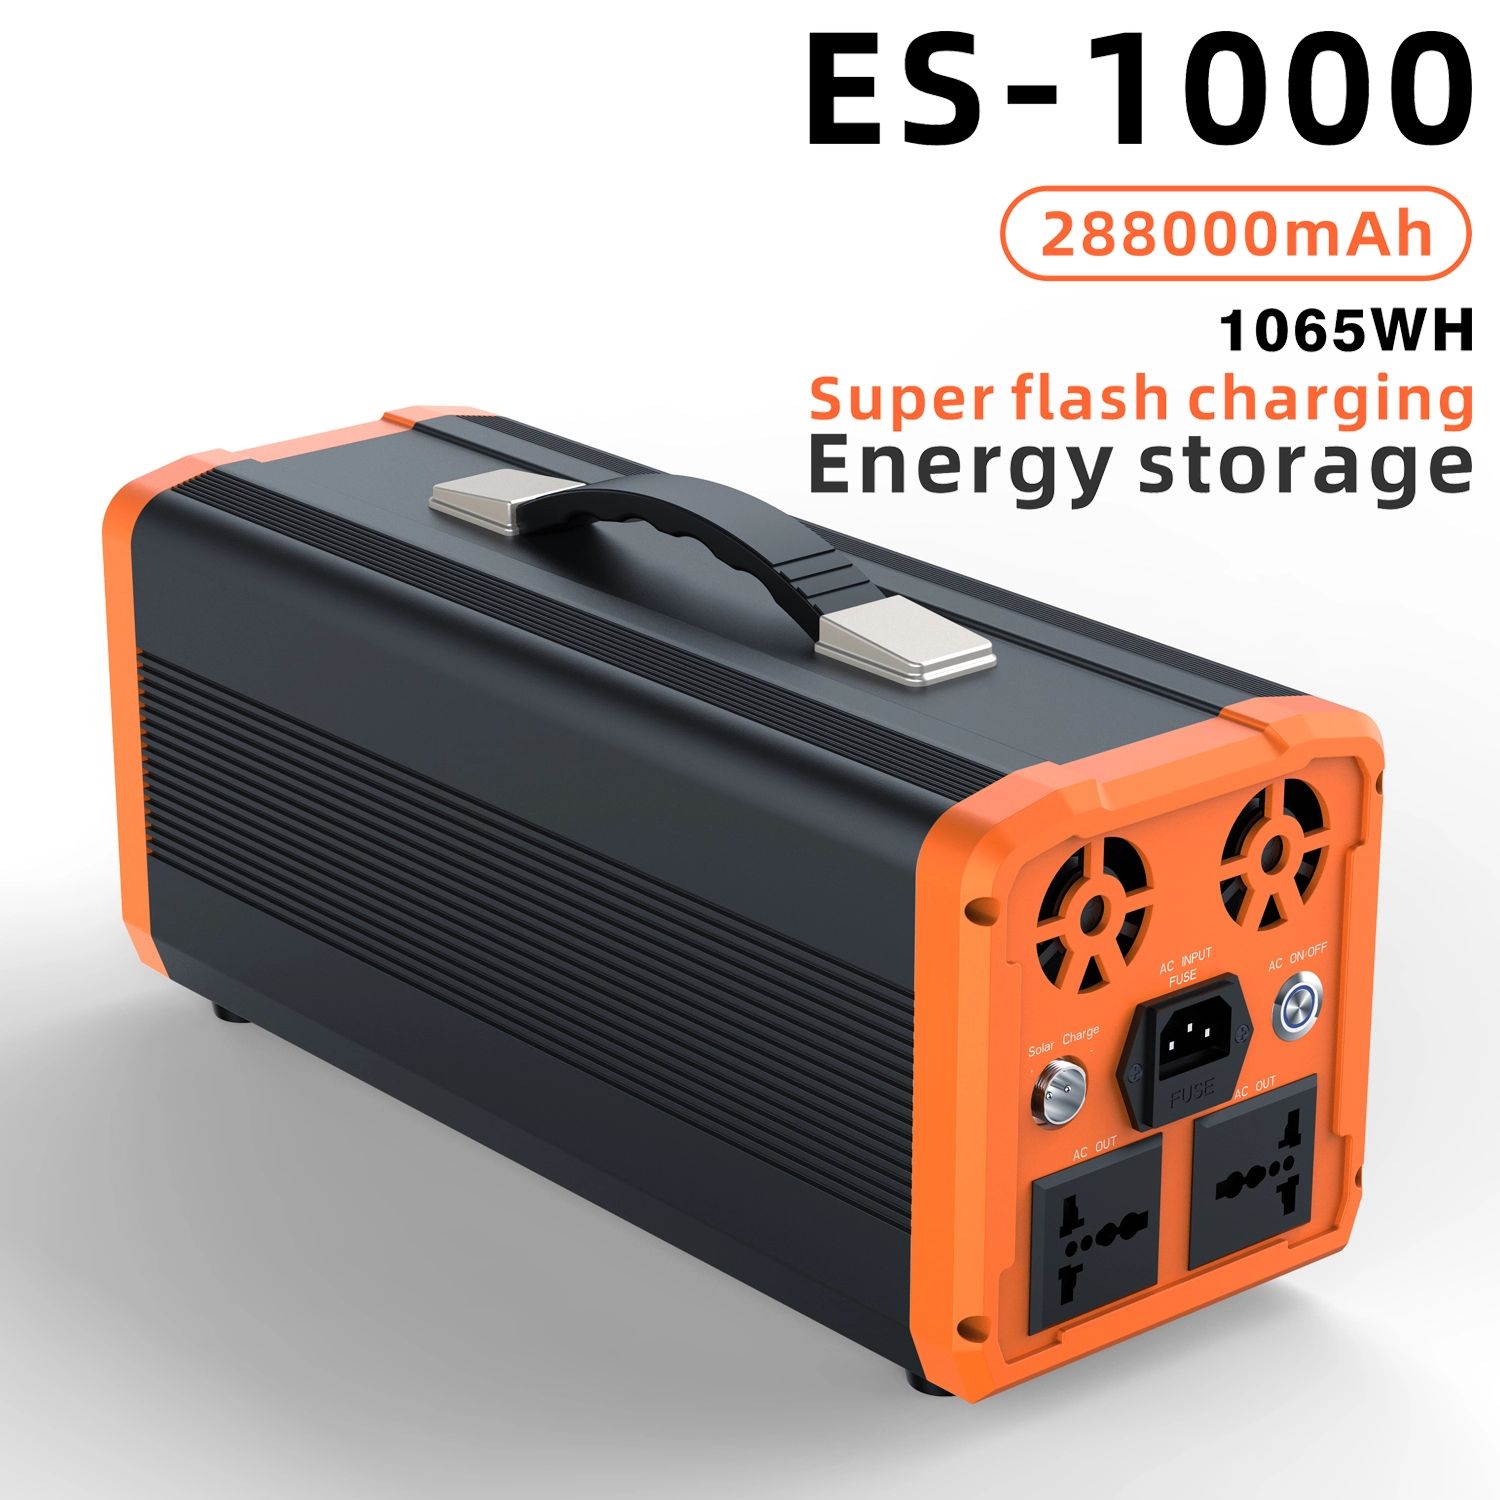 ES-1000 Energy Storage Power solar inverter for outdoor use with lithium battery